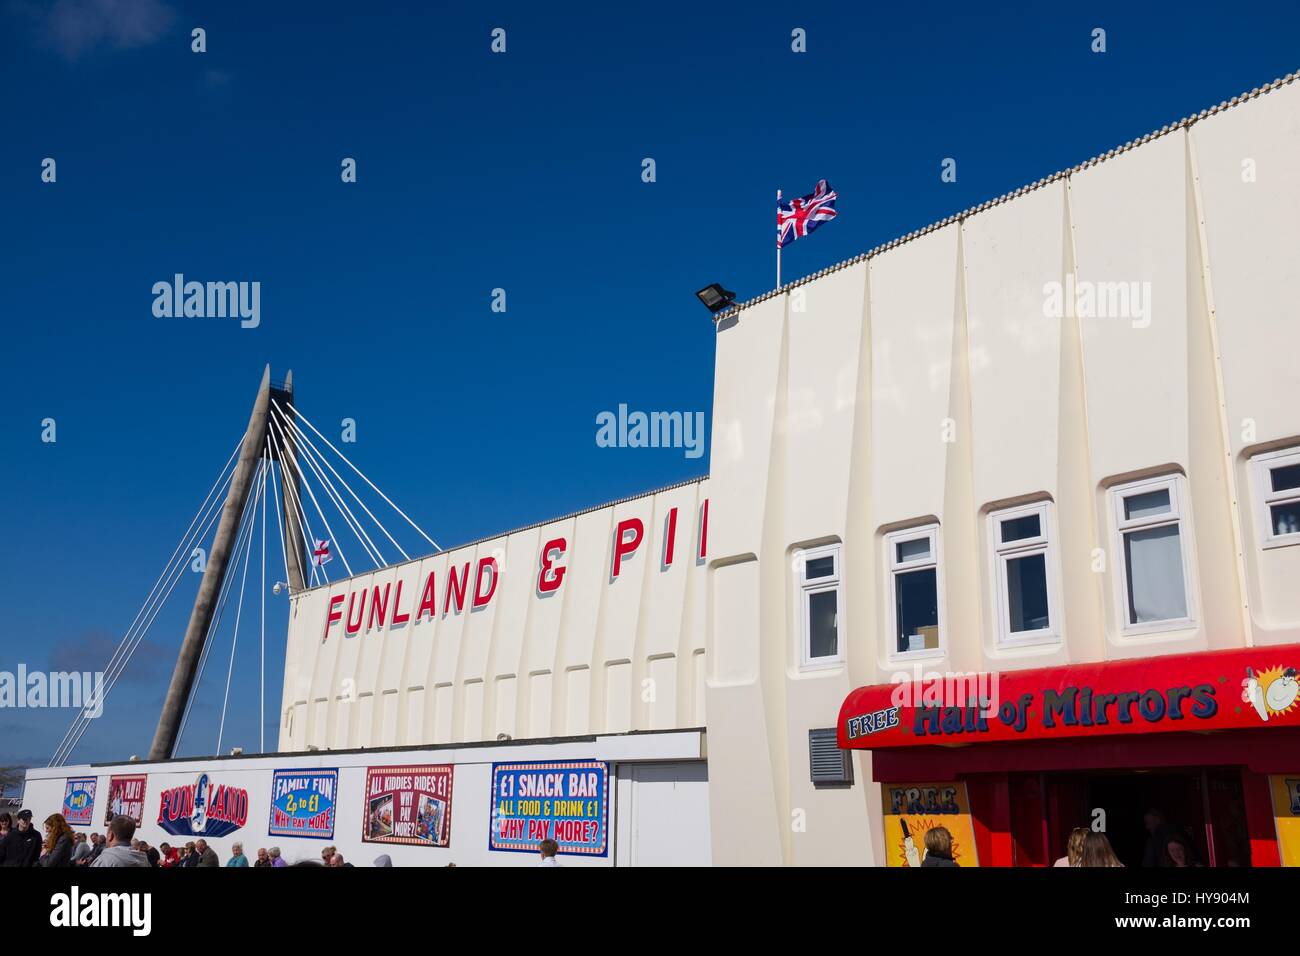 Funland arcade building on Southport pier with Marine Way suspension bridge in background Stock Photo